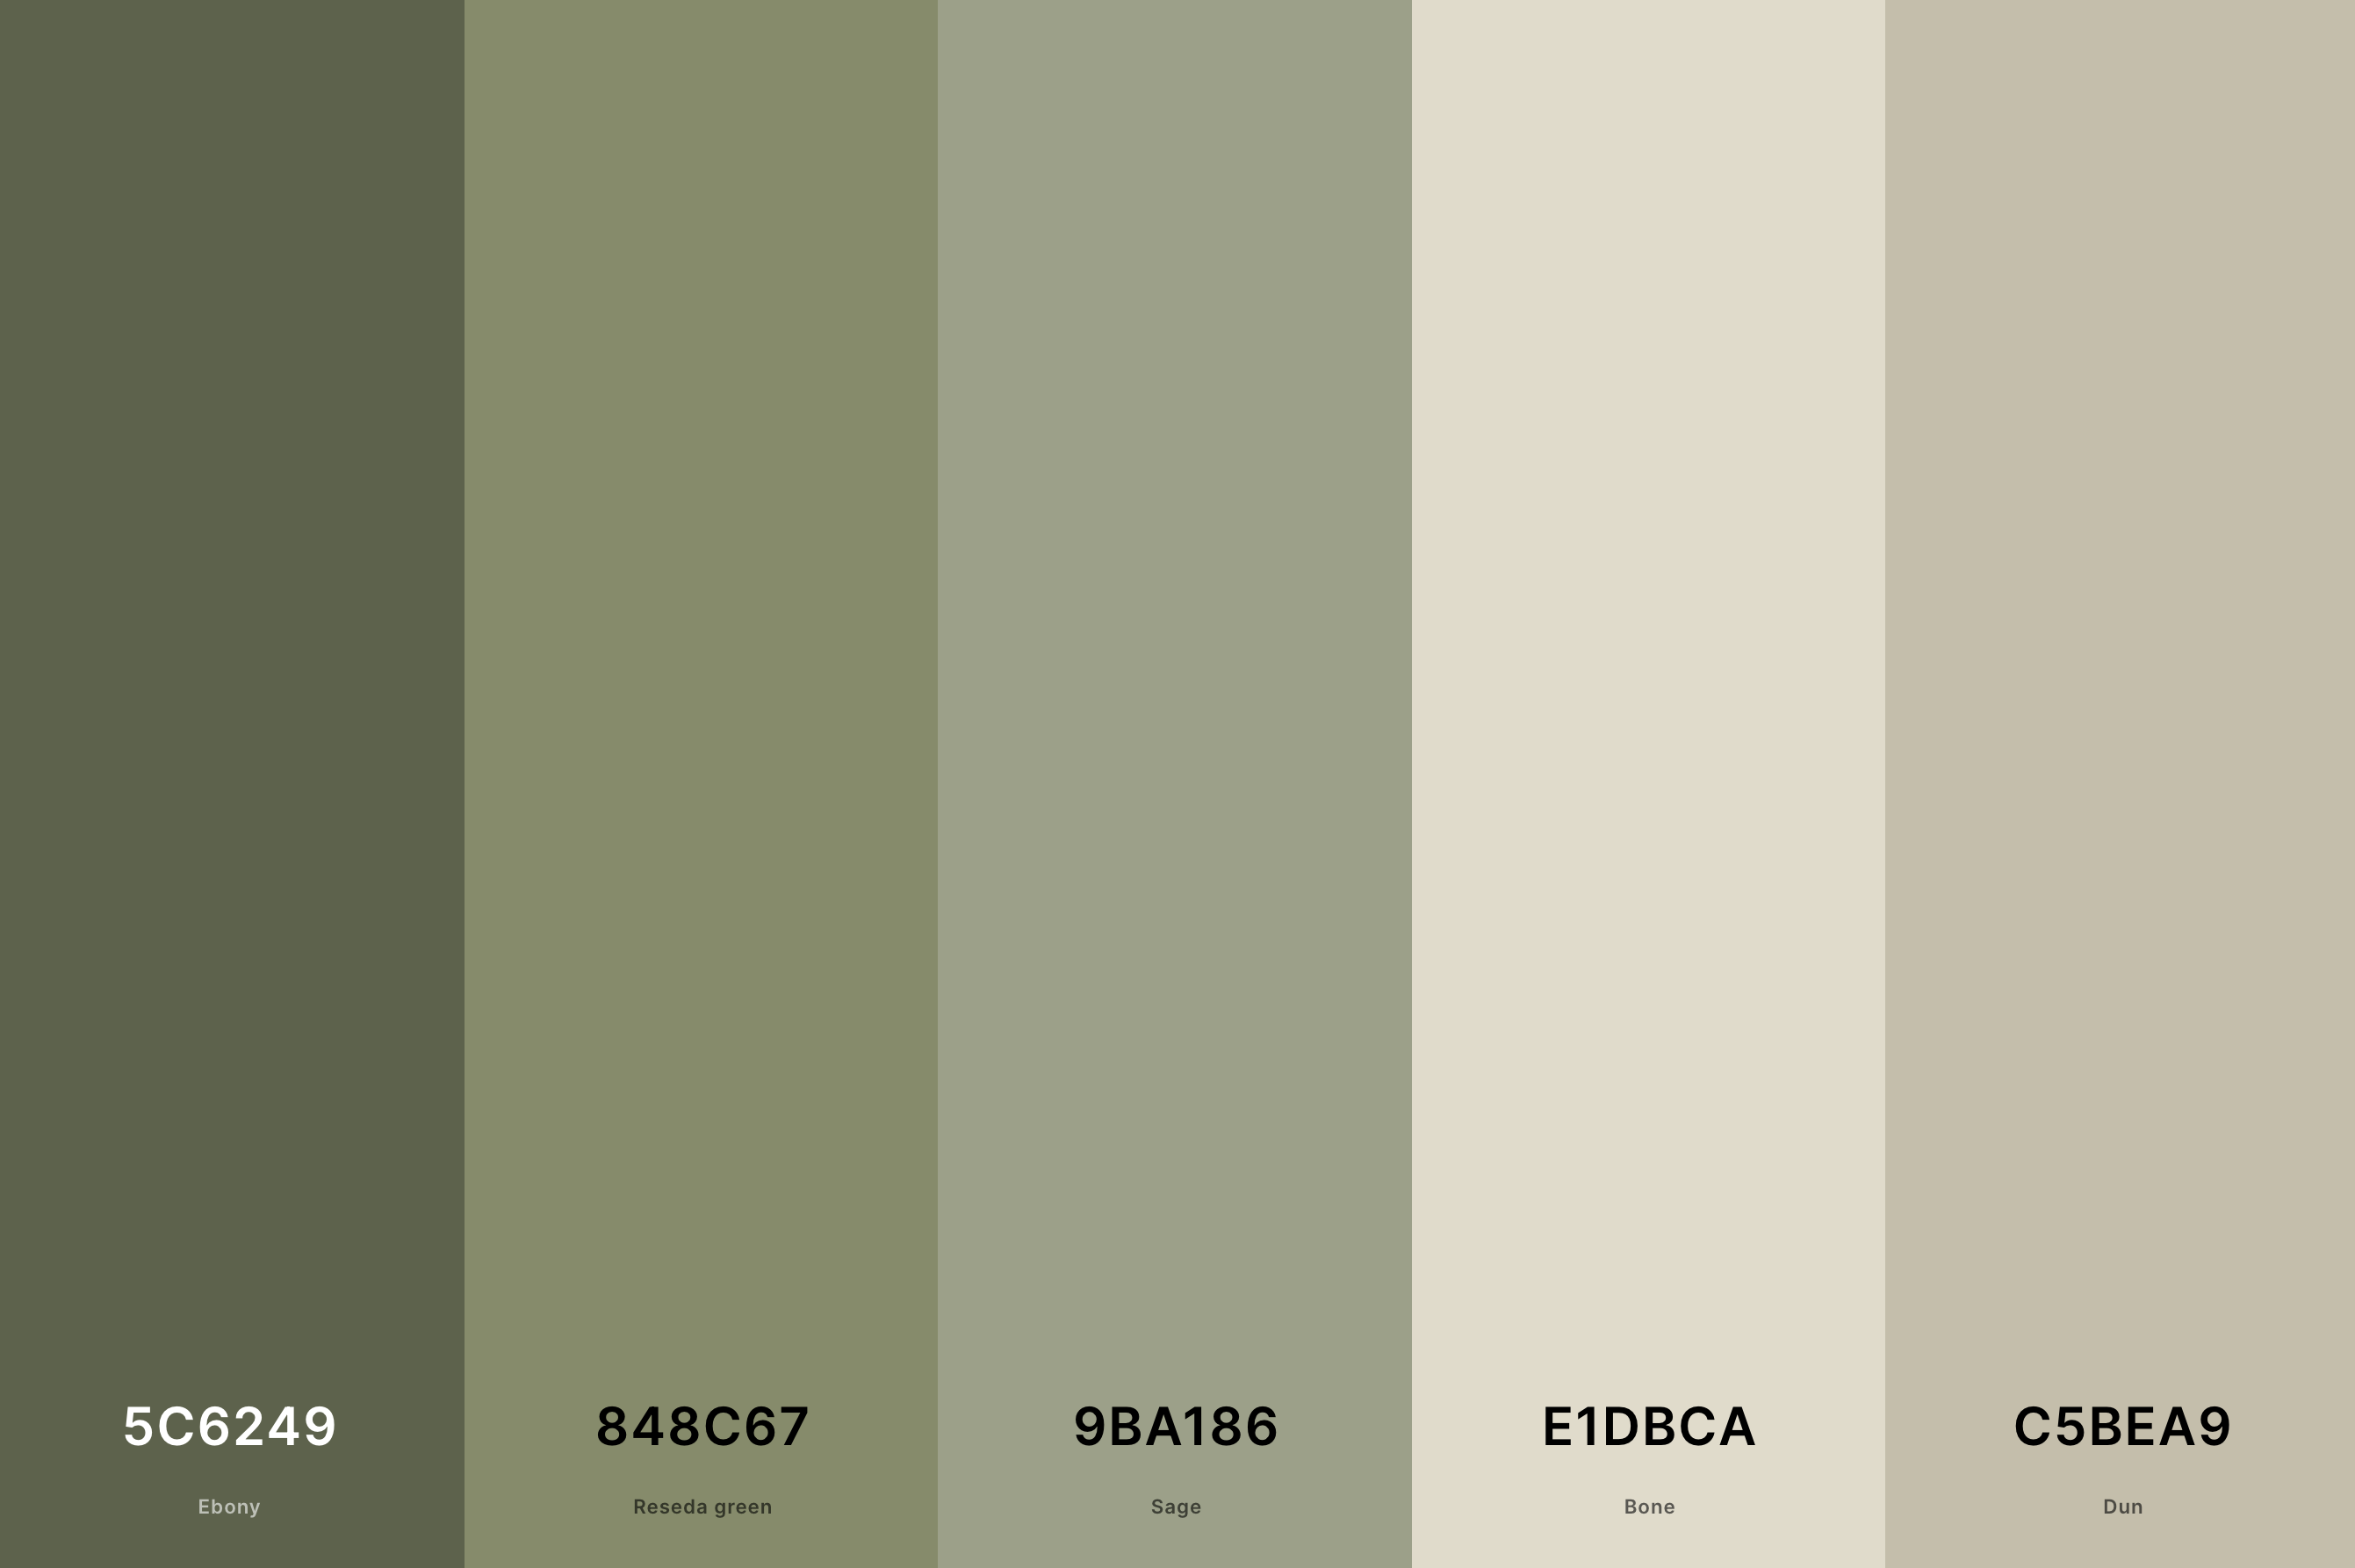 22. Sage Green and Sand Color Palette Color Palette with Ebony (Hex #5C6249) + Reseda Green (Hex #848C67) + Sage (Hex #9BA186) + Bone (Hex #E1DBCA) + Dun (Hex #C5BEA9) Color Palette with Hex Codes